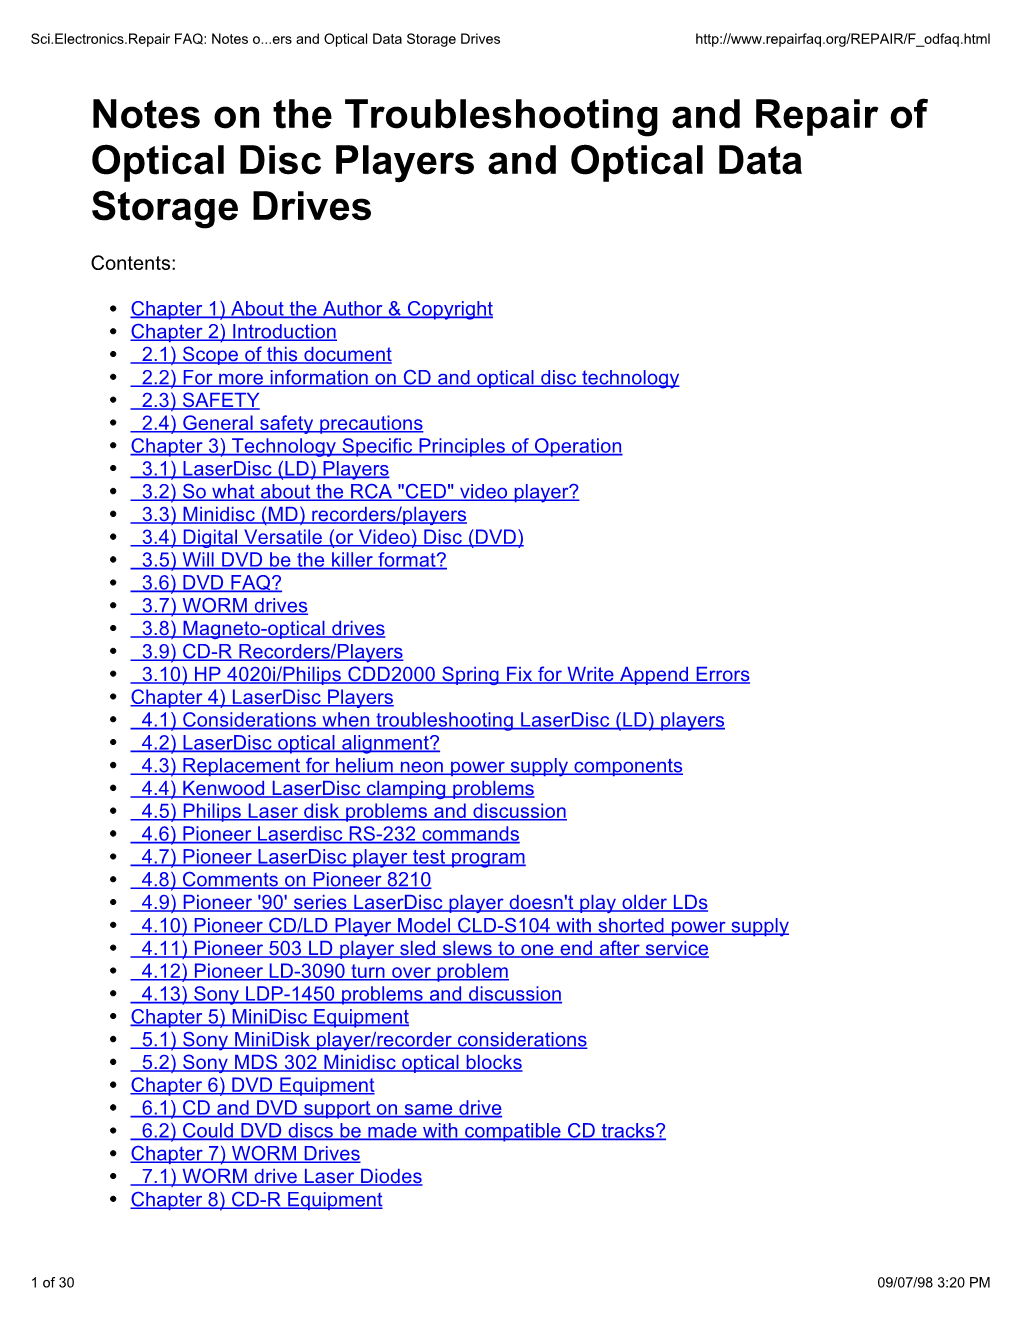 Notes on the Troubleshooting and Repair of Optical Disc Players and Optical Data Storage Drives